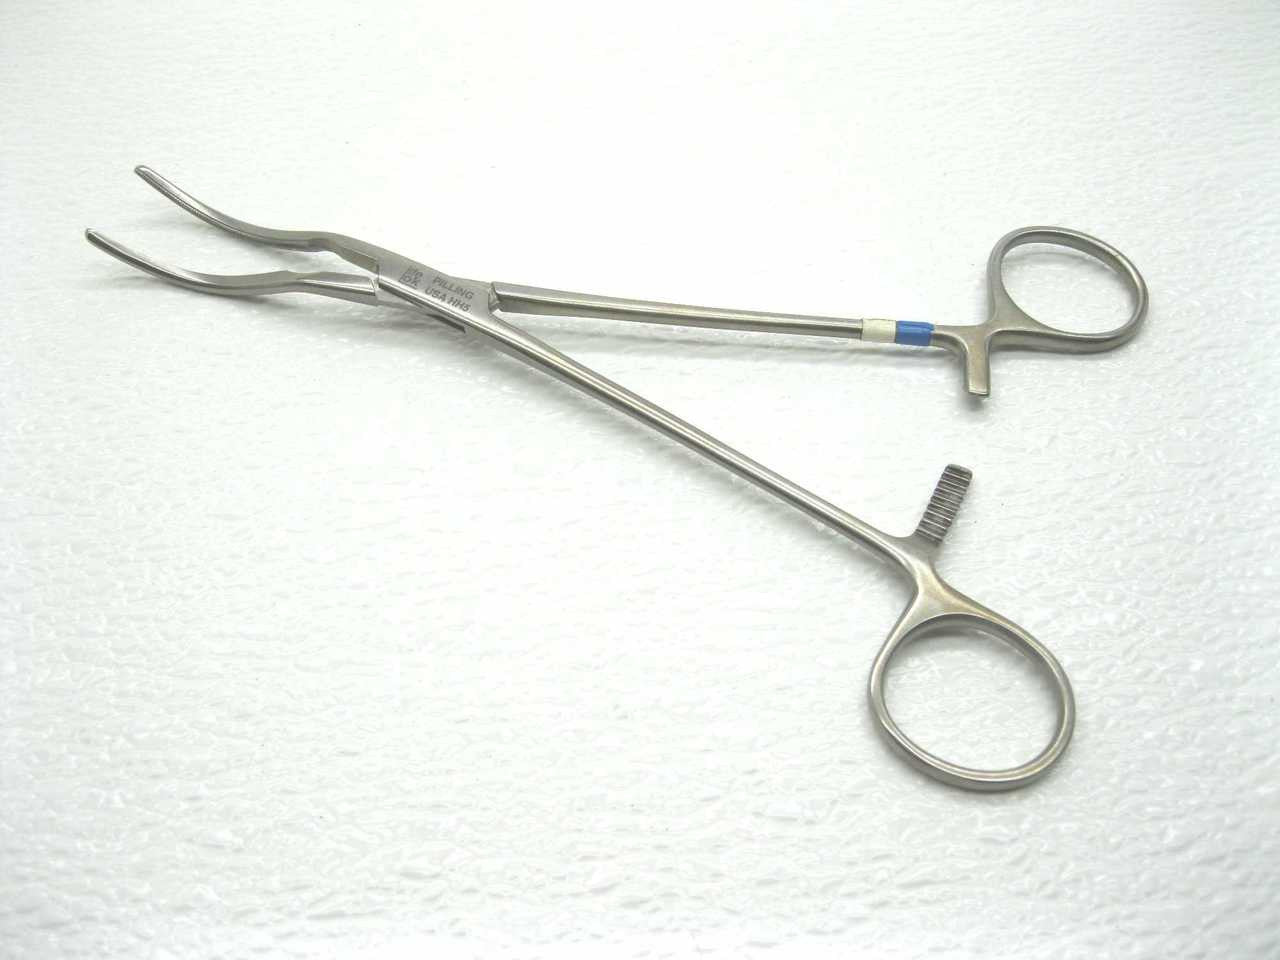 Booth Medical - Pilling Glover Spoon Shaped Clamp - 35-3840